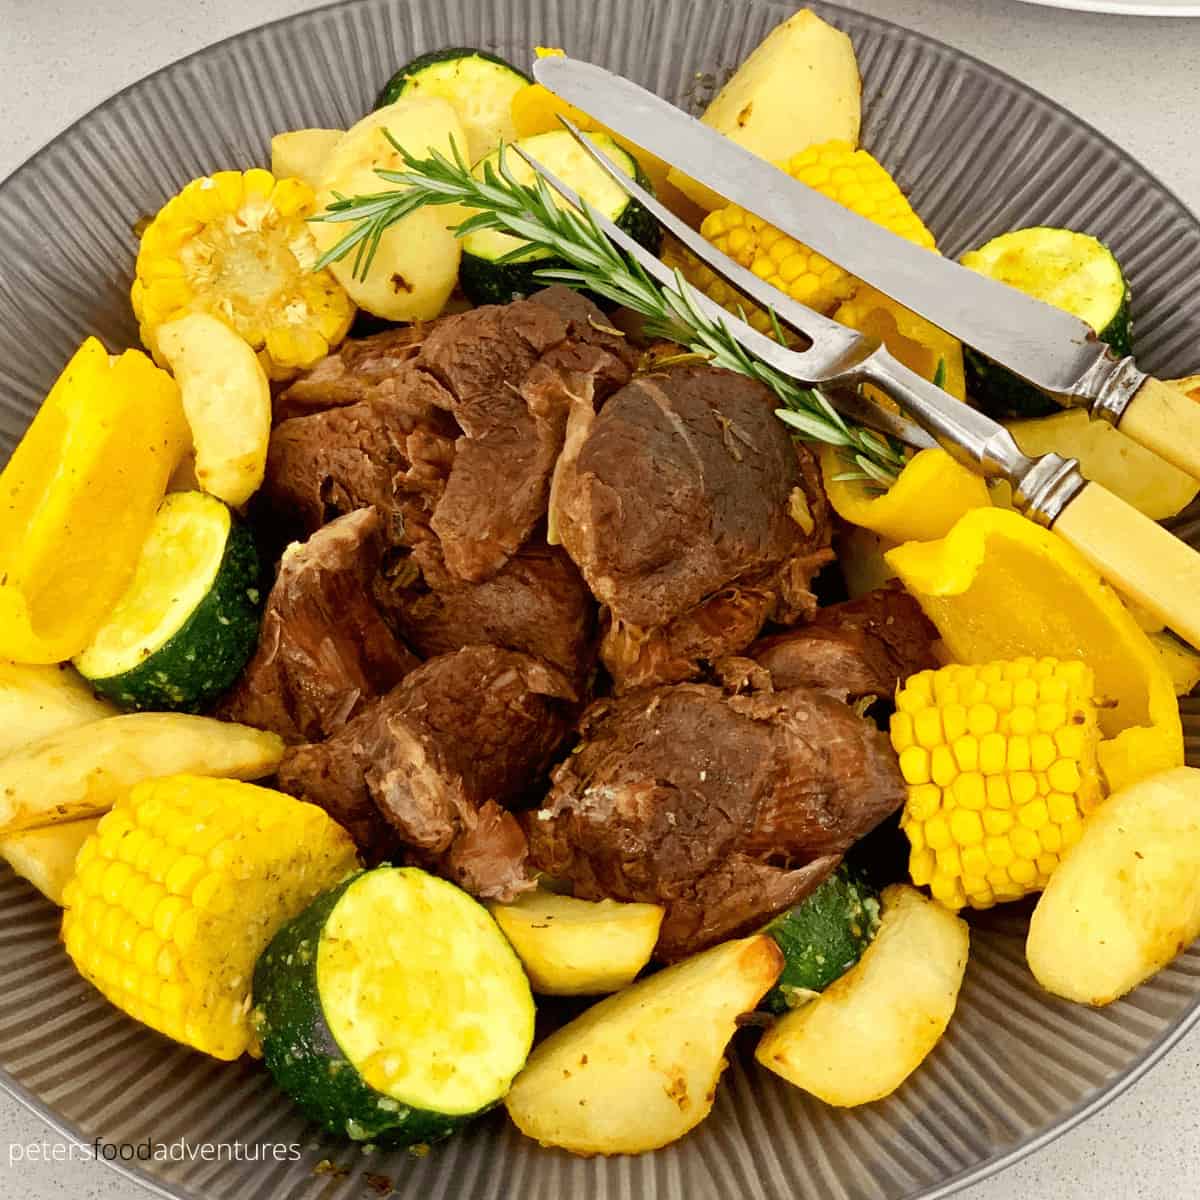 A foolproof Greek Instant Pot Lamb recipe with rosemary, garlic, oregano, thyme, lemon and red wine. An easy pulled lamb or tender roast dinner recipe, a pressure cooker favorite with a lamb gravy recipe!